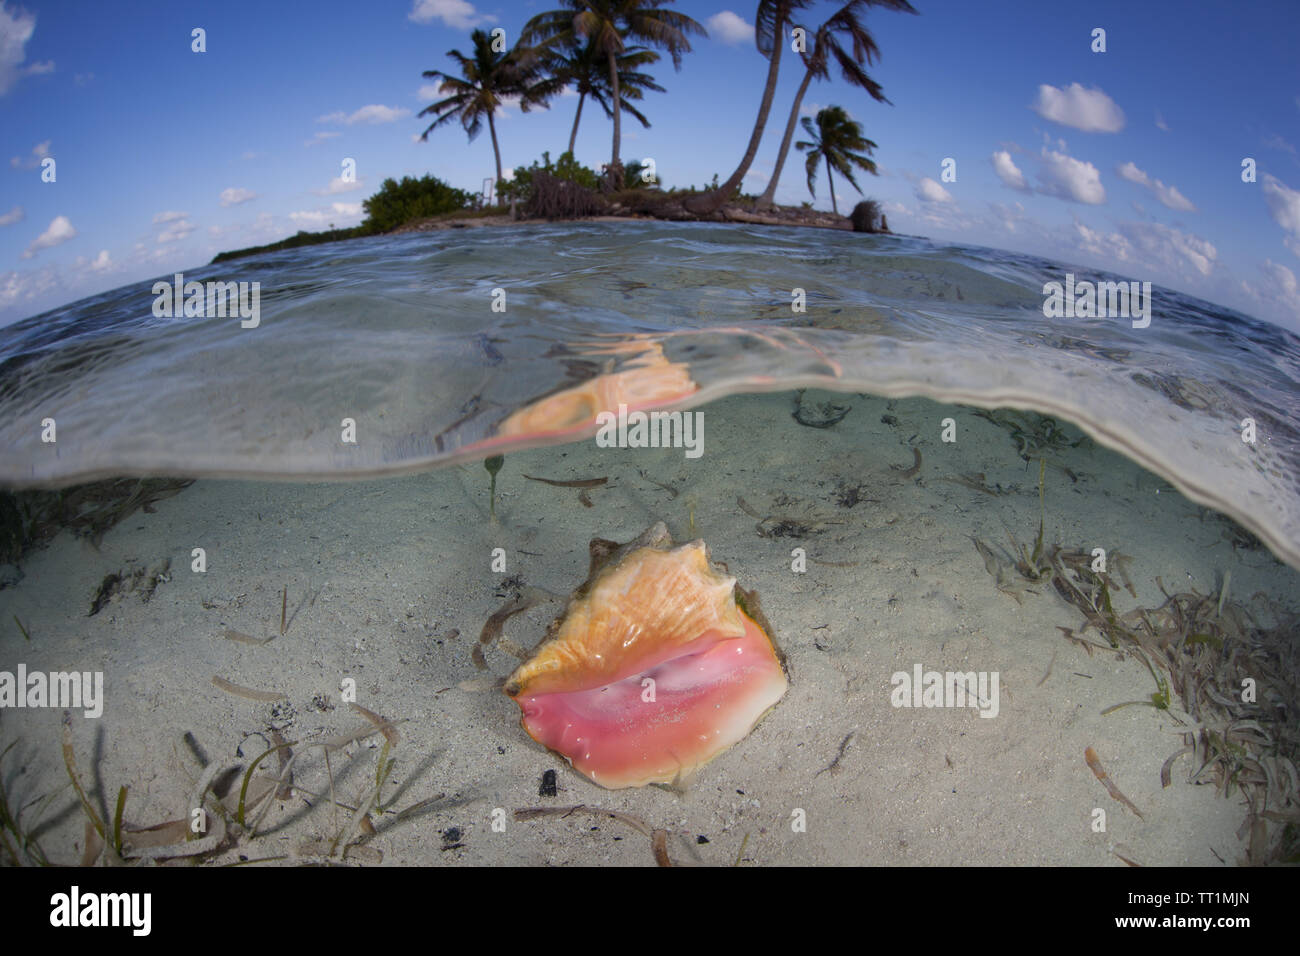 A Queen conch shell lies underwater near an island in the Caribbean Sea off the coast of Belize. This area is part of the Mesoamerican Barrier Reef. Stock Photo